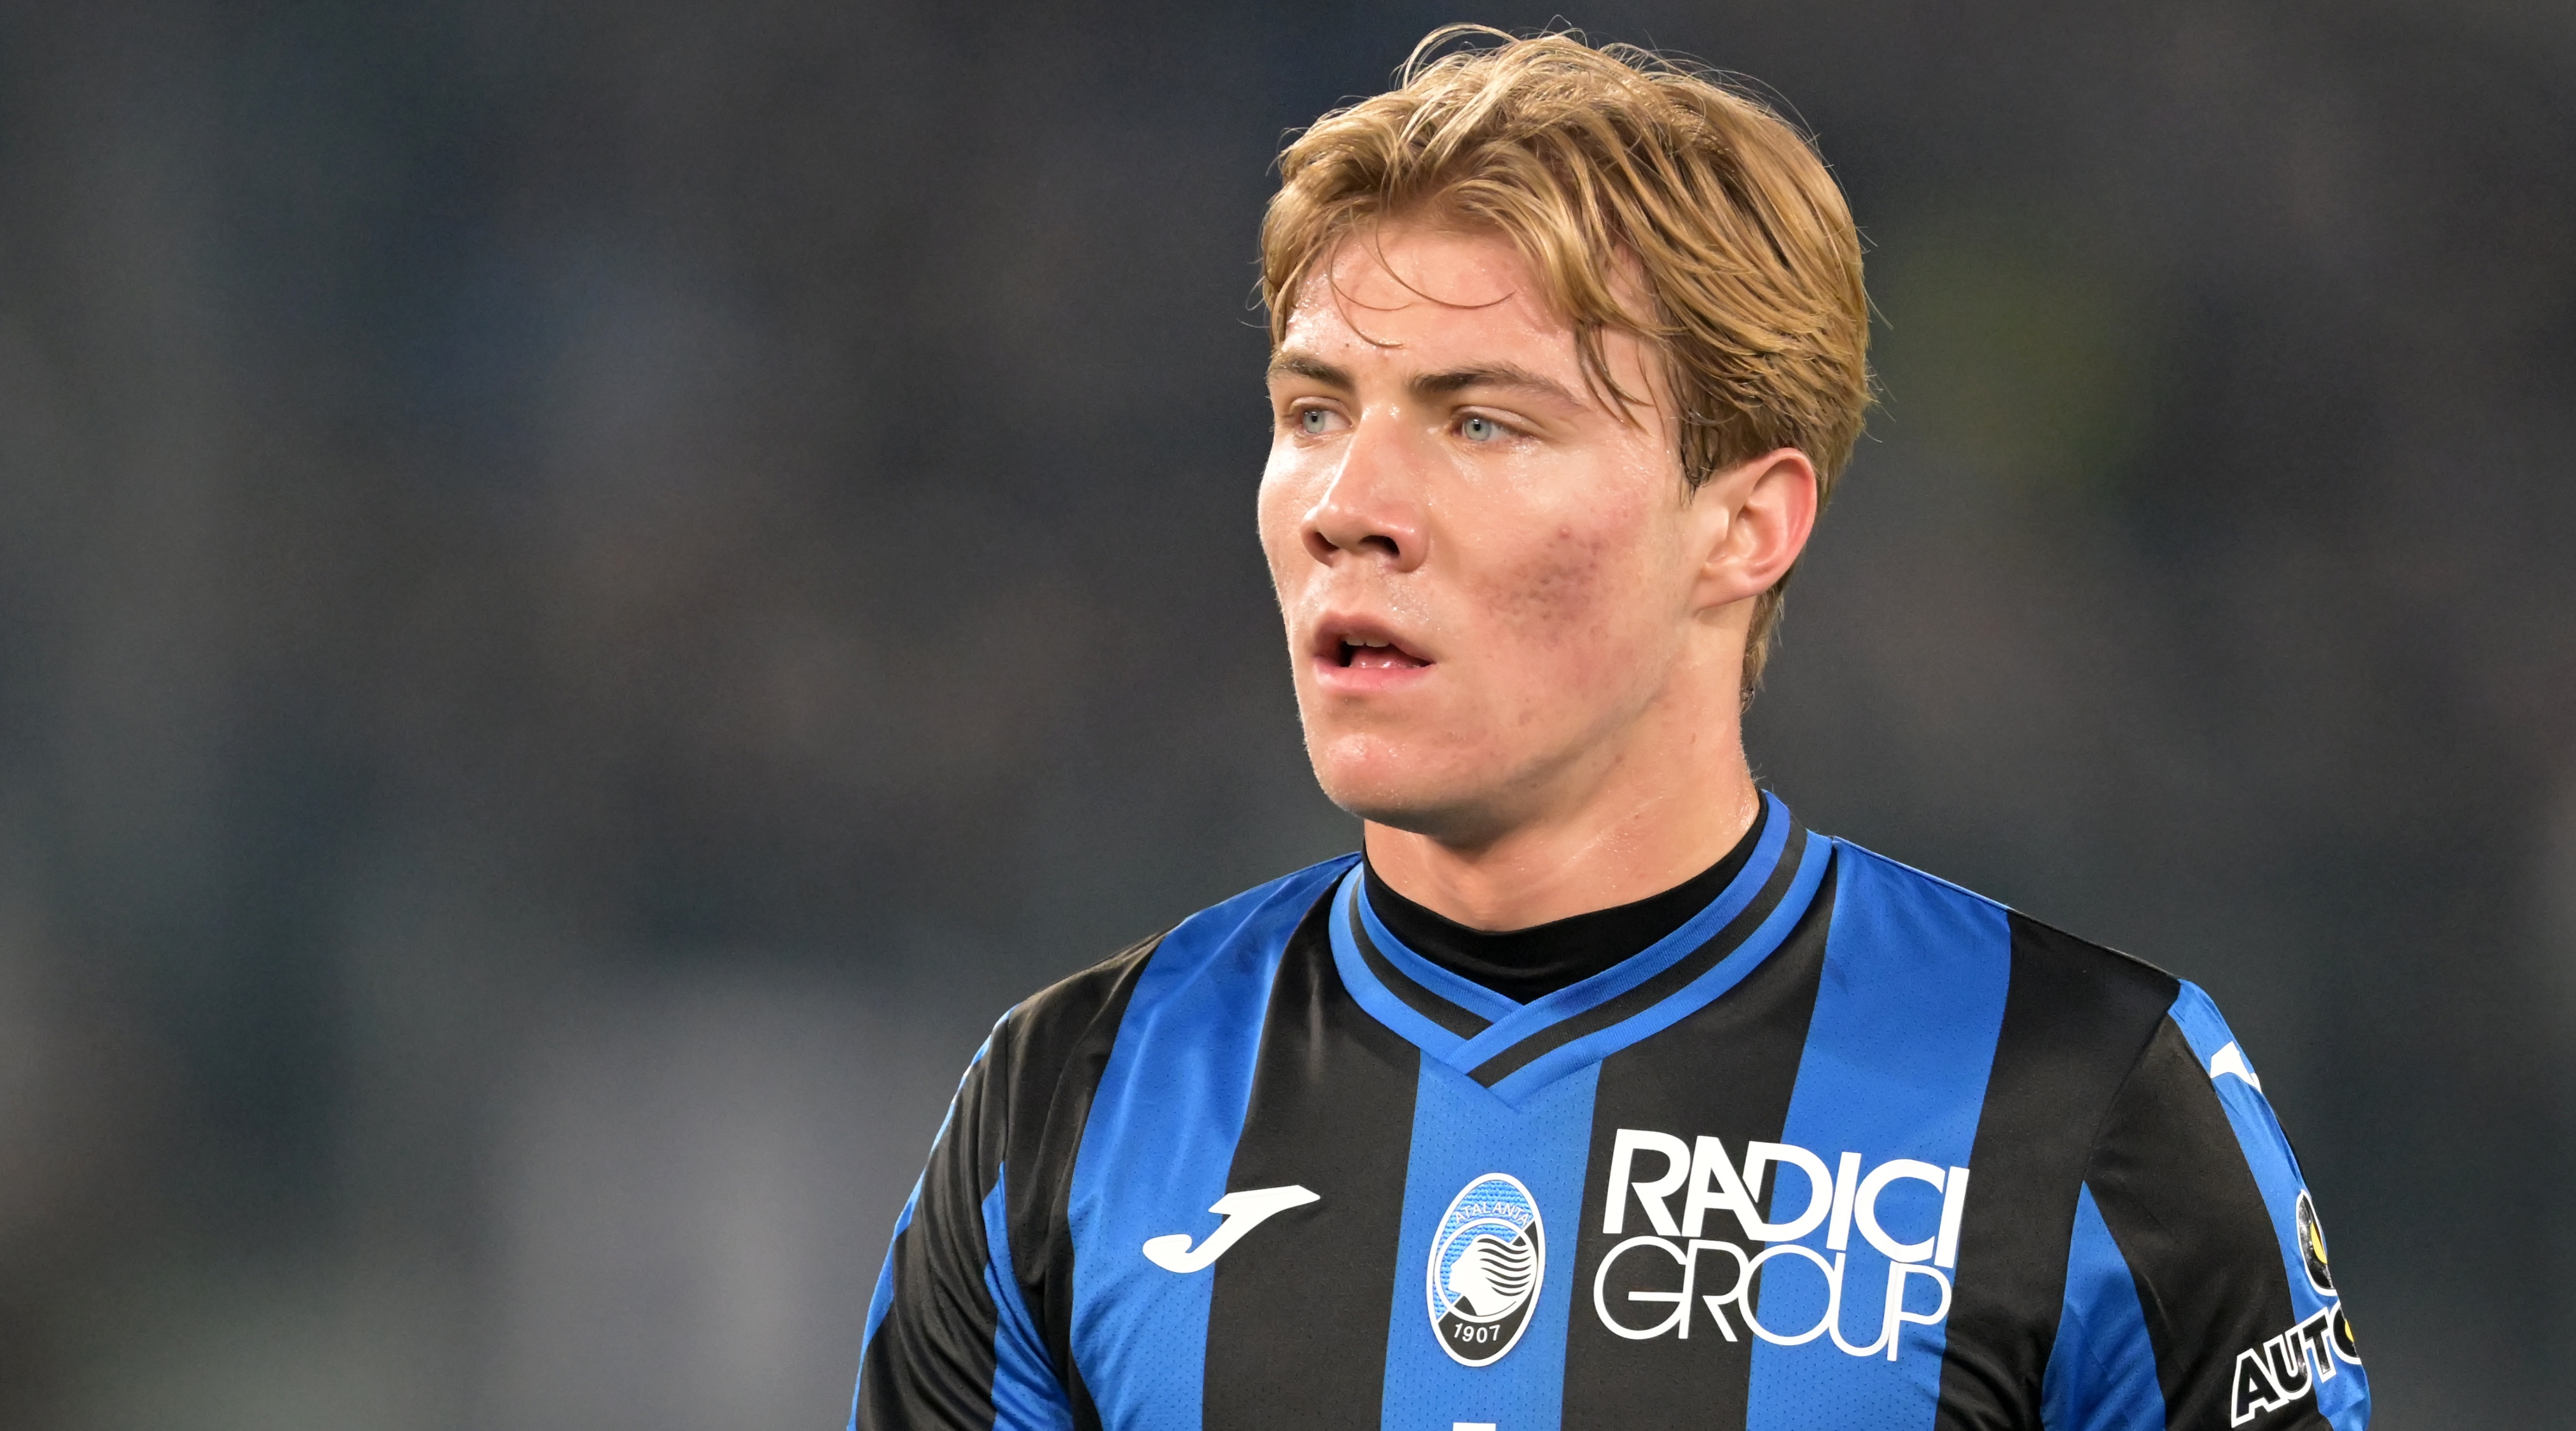 Arsenal rumoured transfer target Rasmus Hojlund looks on during the Serie A match between Lazio and Atalanta at the Stadio Olimpico on 11 February, 2023 in Rome, Italy.